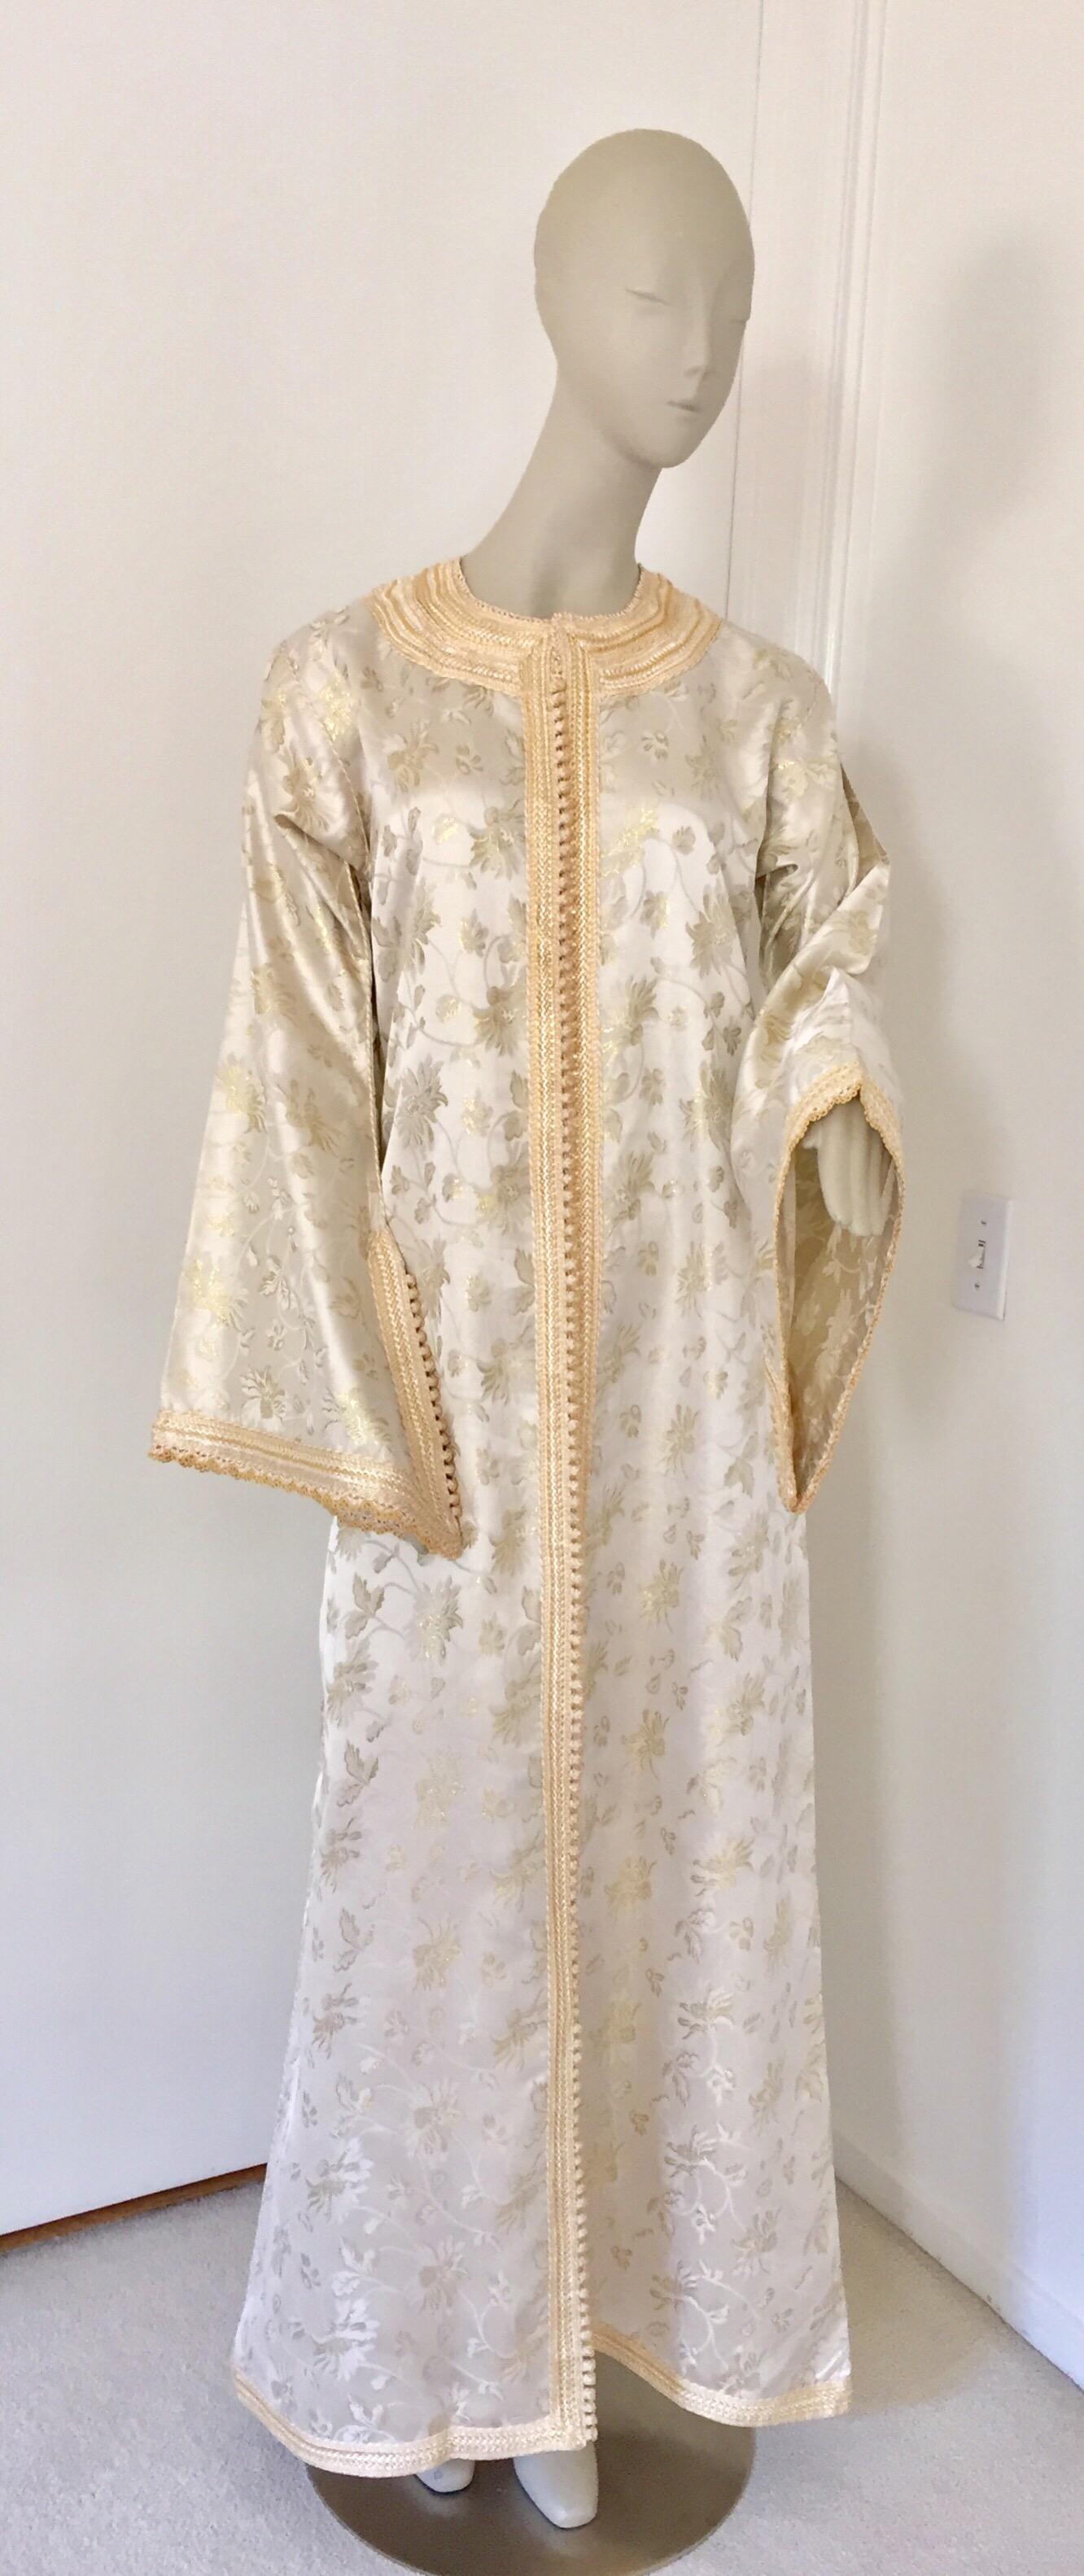 Elegant Moroccan caftan white and gold lame metallic floral brocade kaftan.Circa 1970s.This beautiful long dress is hand crafted in Morocco and tailored for a relaxed fit with wide sleevesThis long maxi dress vintage kaftan is embroidered and